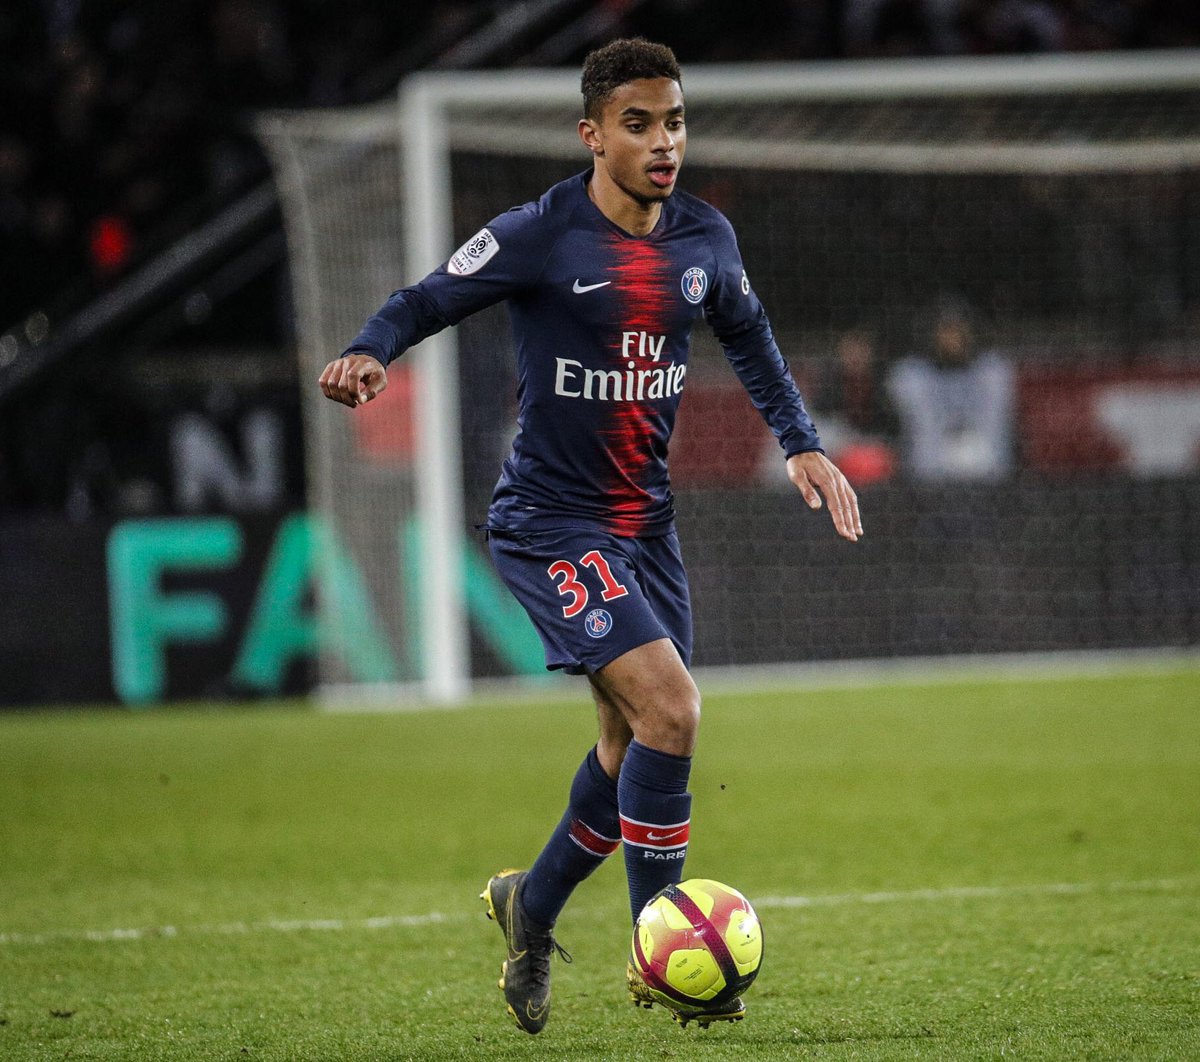 Paris Saint-Germain on Twitter: "🎙️💬 Colin Dagba: "We know that the #Classique is not a game like the others. We had to win, especially in front of our fans" 🔴🔵#ICICESTPARIS… https://t.co/6tz2LZvtgS"